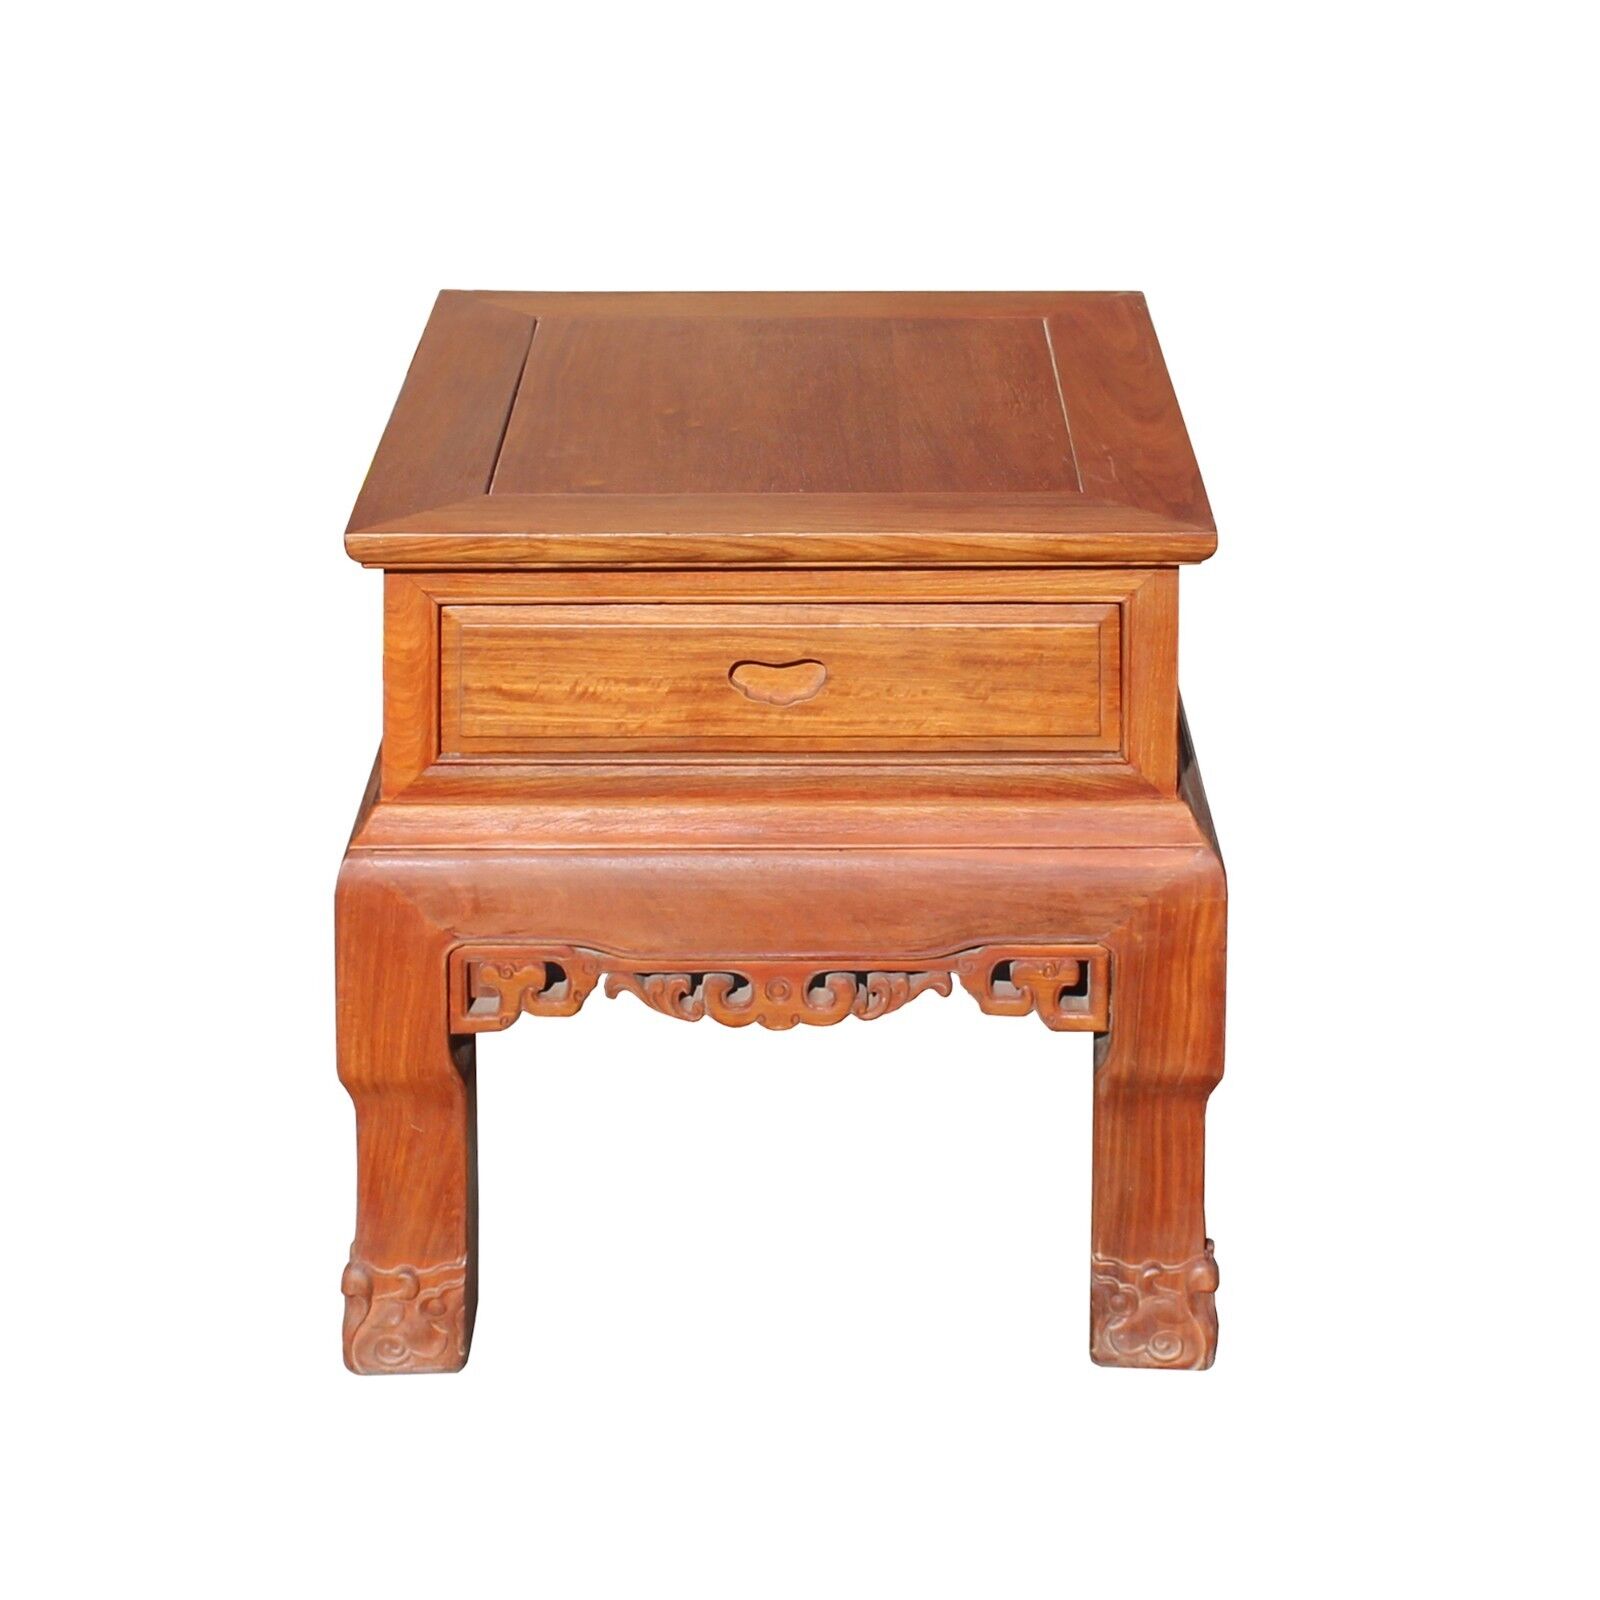 Chinese Oriental Huali Rosewood Plain Side Tea Table Stand cs4595 Handmade Does Not Apply